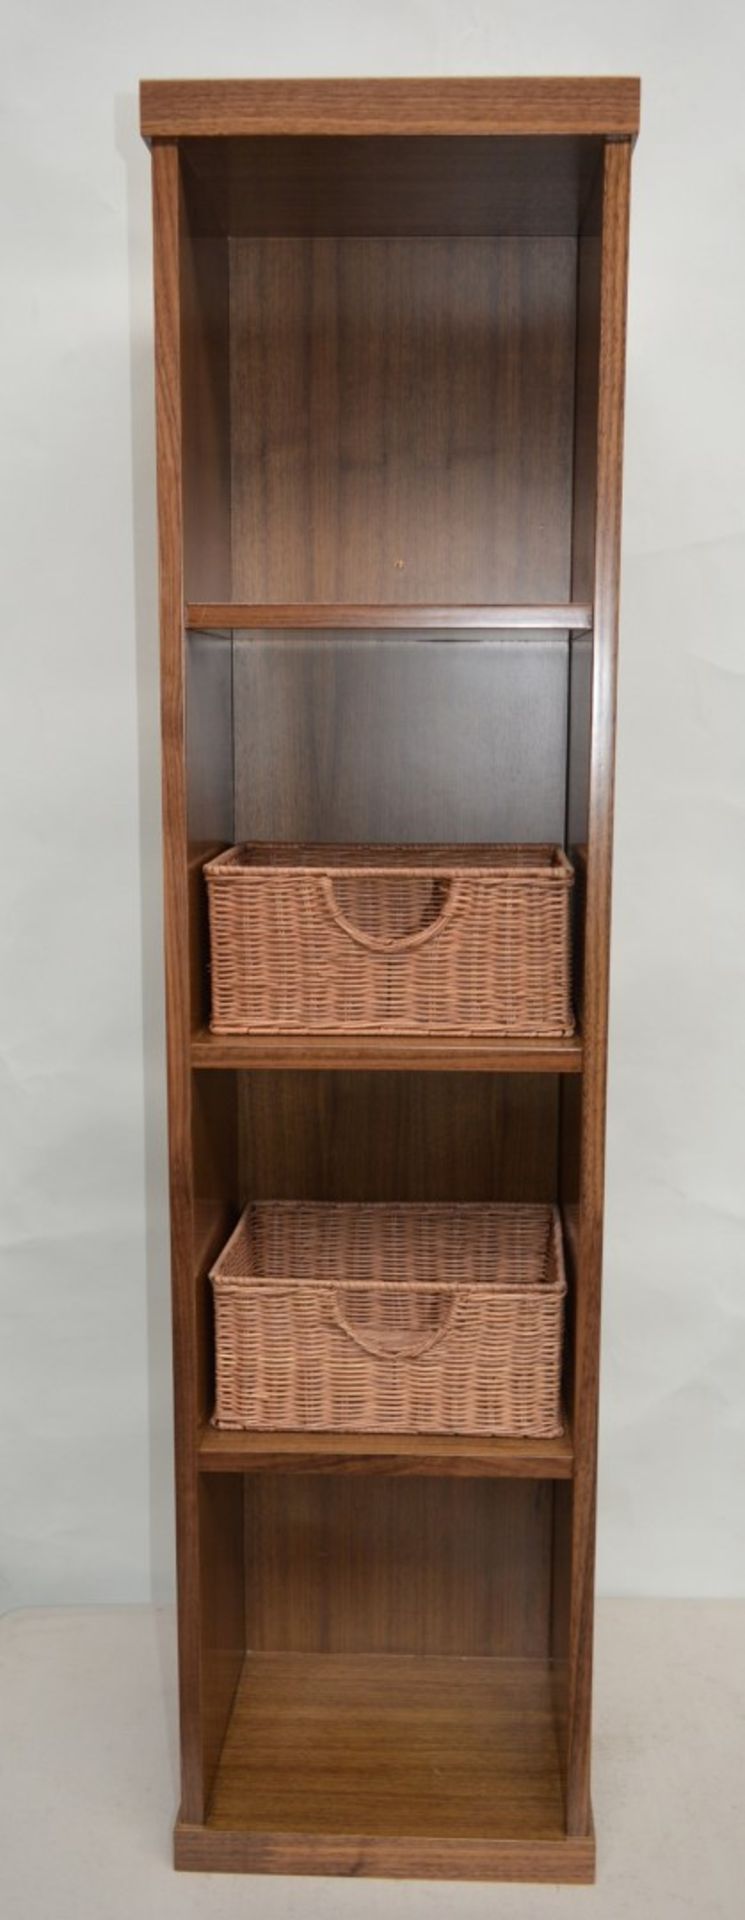 1 x Vogue ARC Series 2 Bathroom Storage Shelving Unit - Wall Mounted or Floor Standing - WALNUT - Image 7 of 9